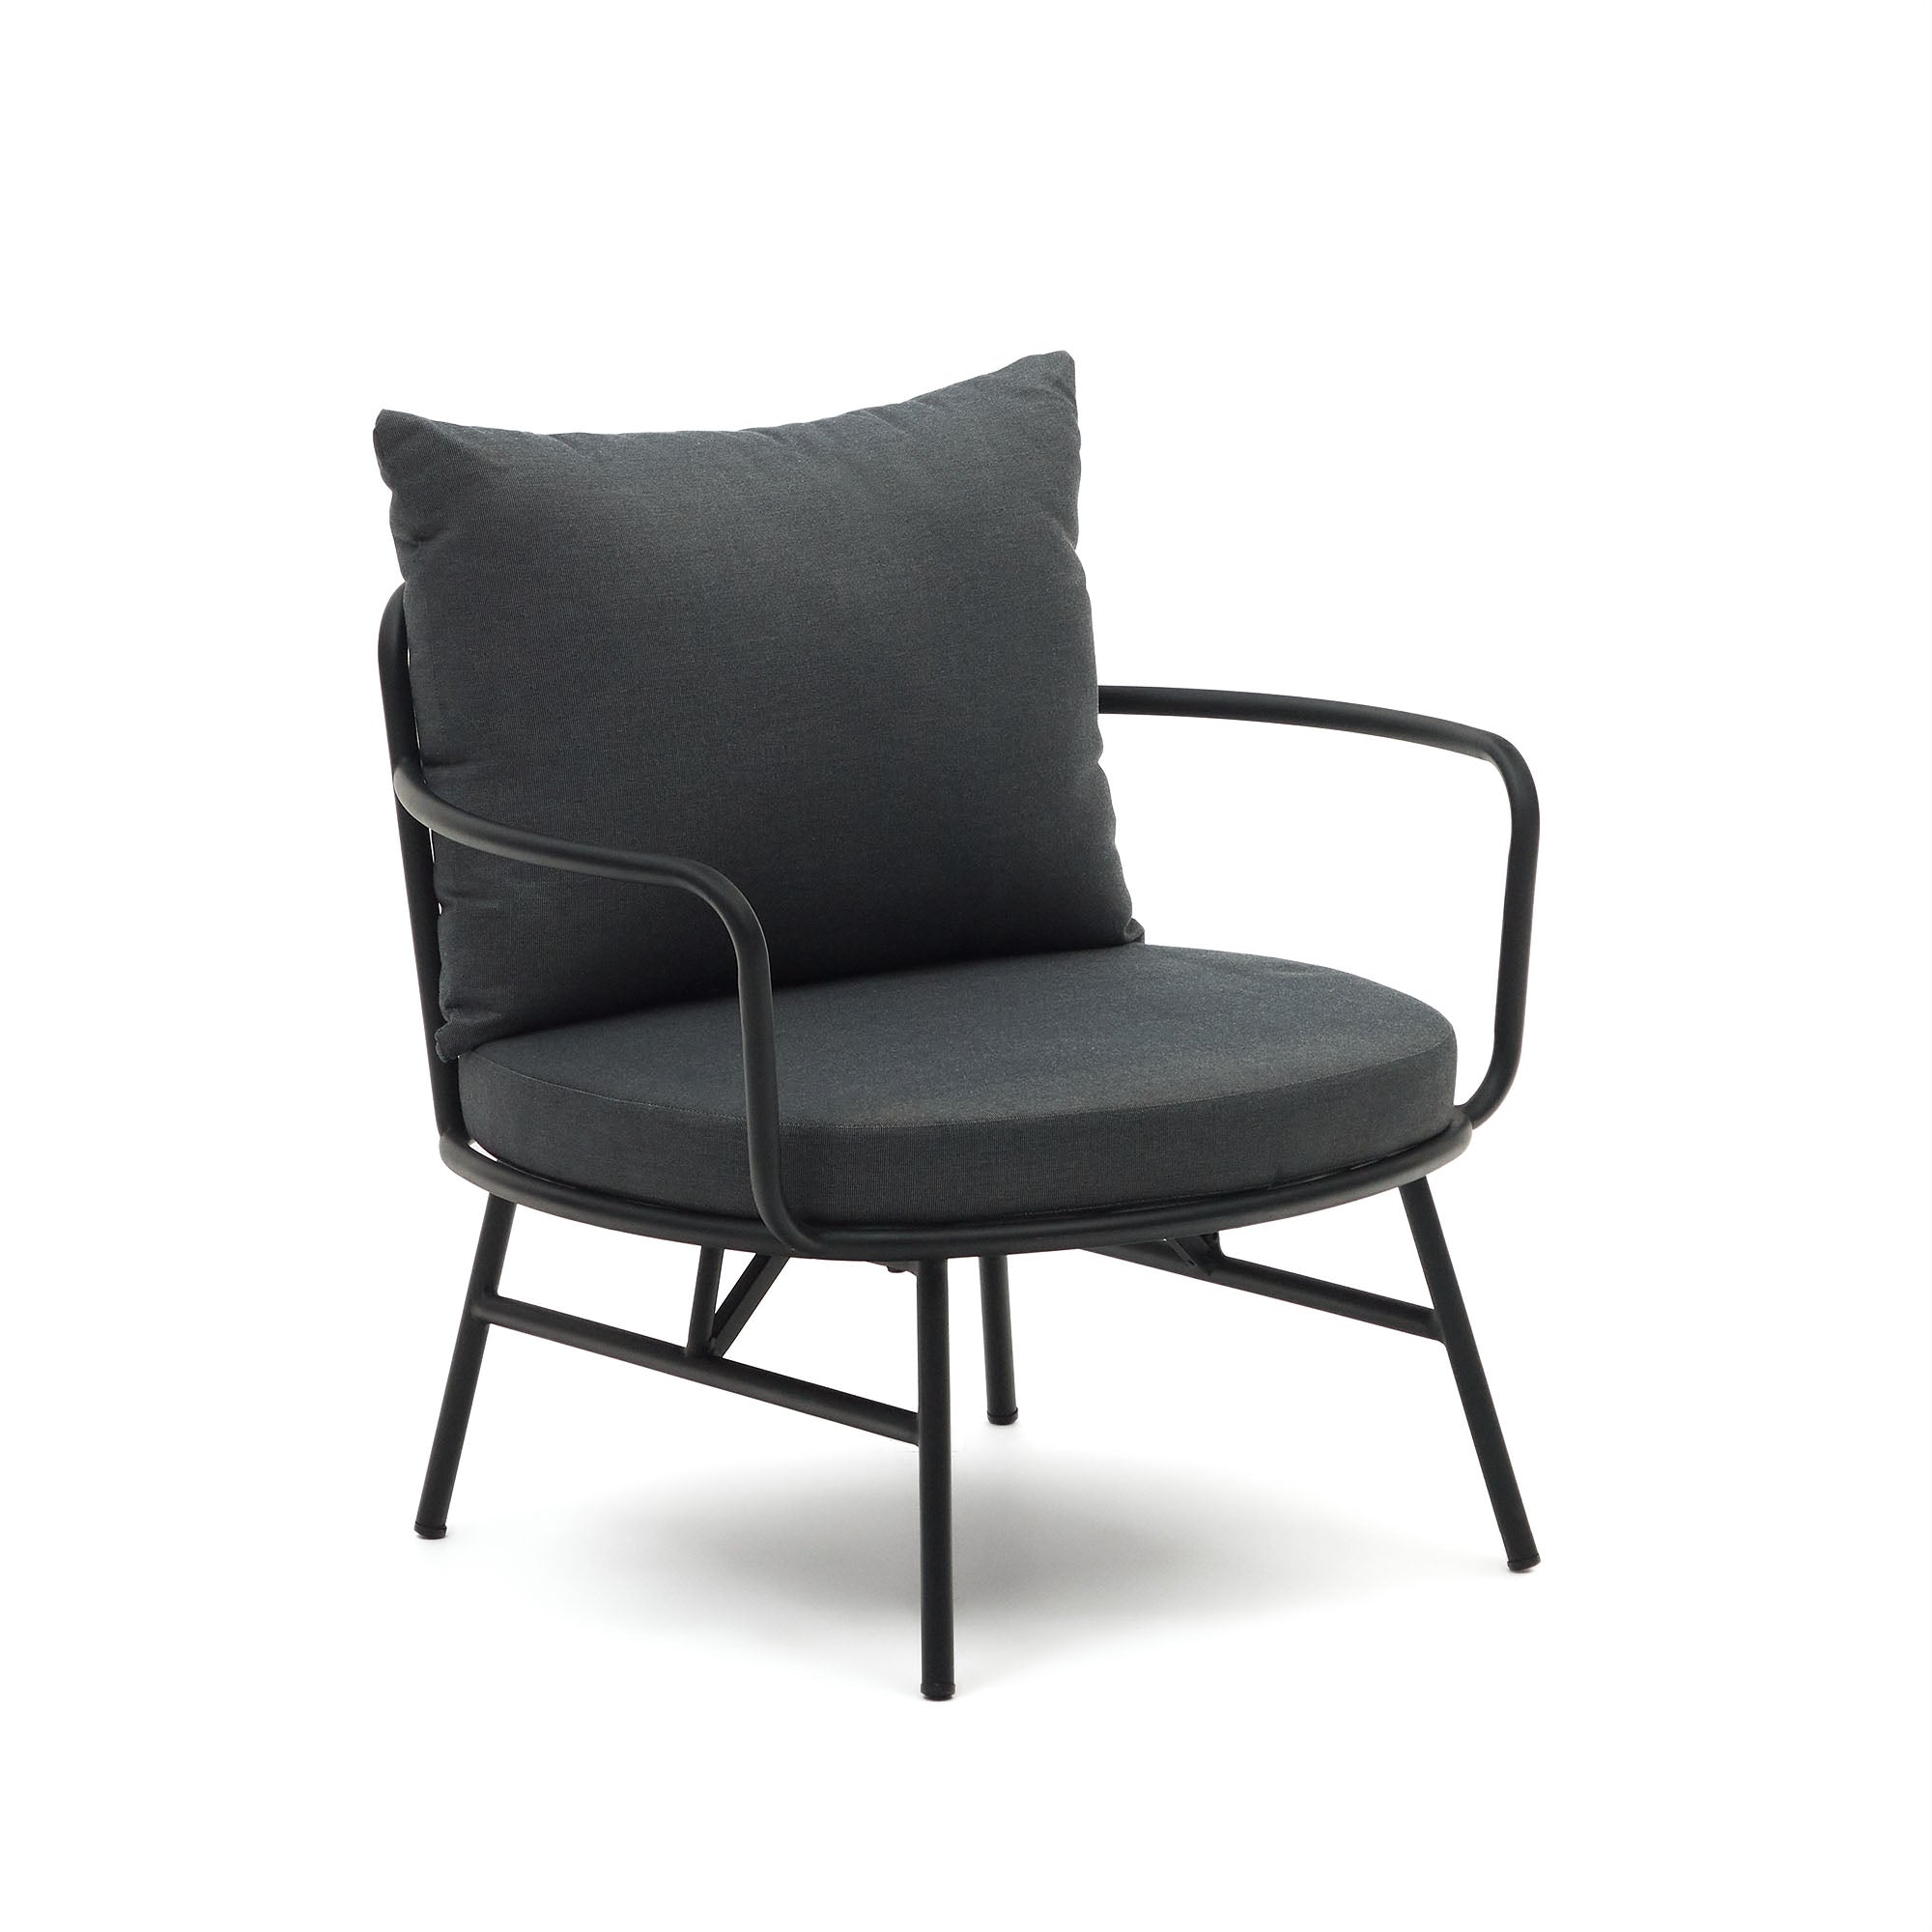 Bramant steel armchair with black finish